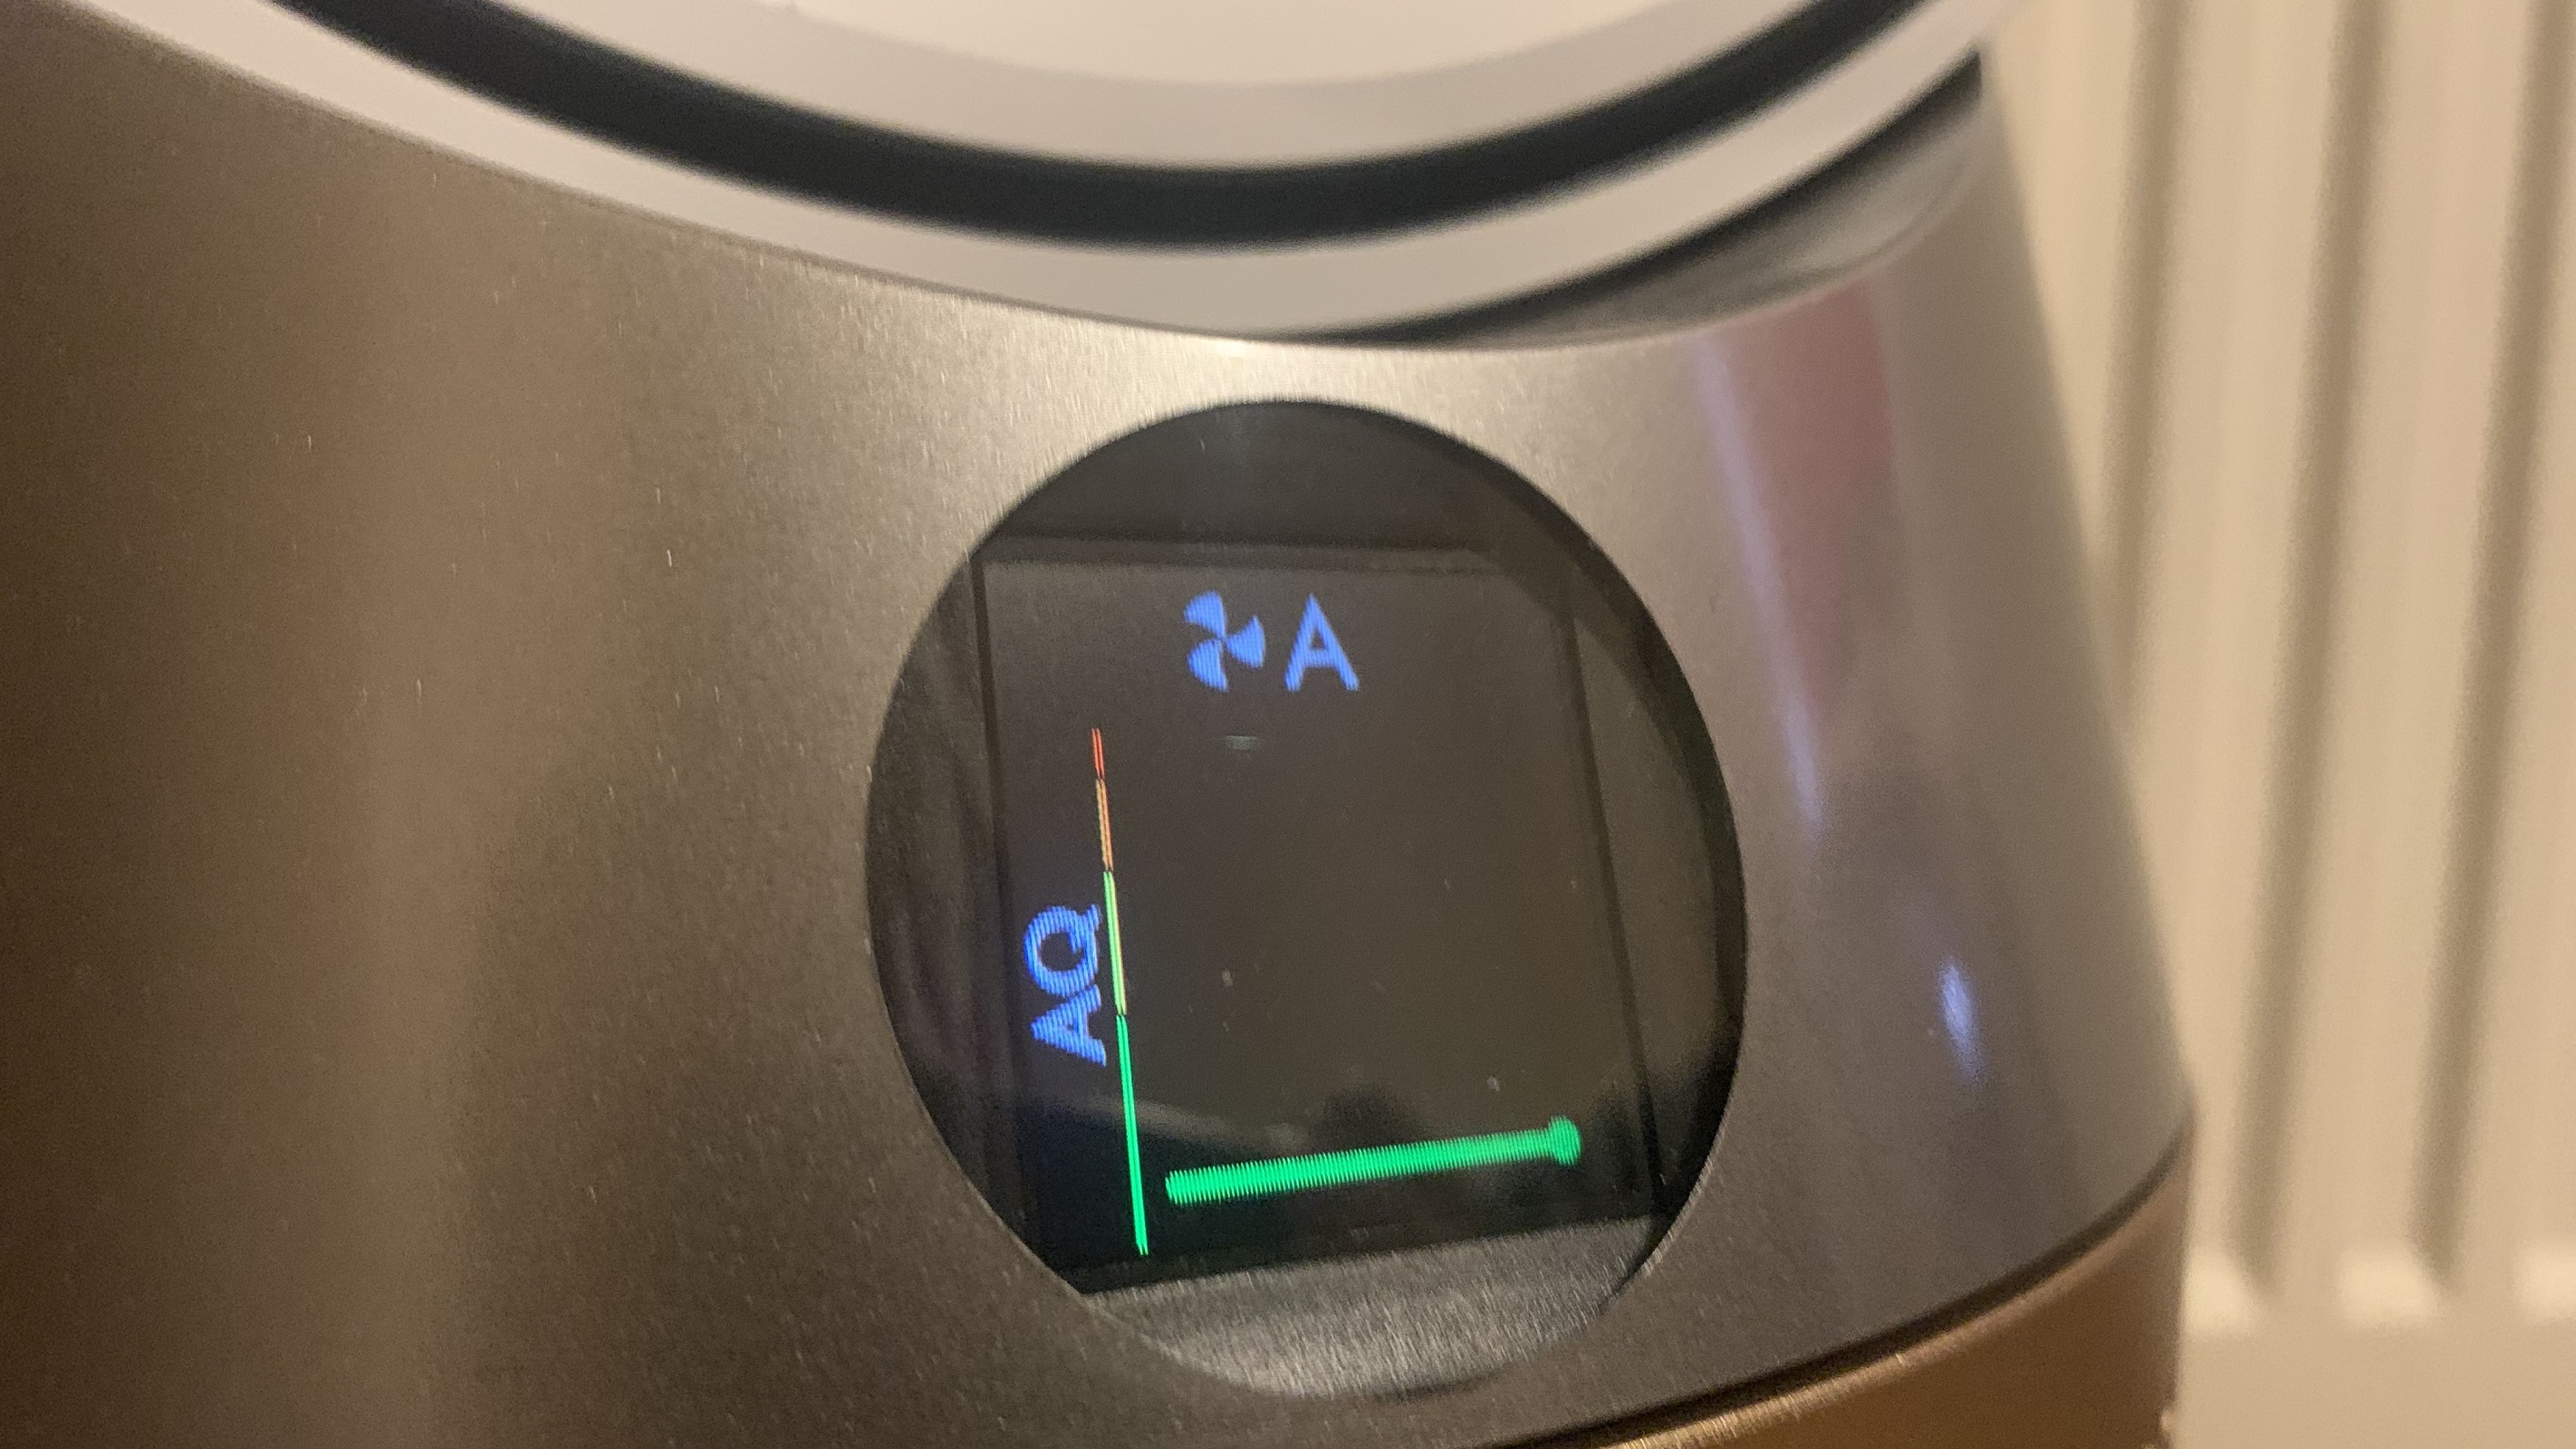 lcd display on the dyson hot+cool